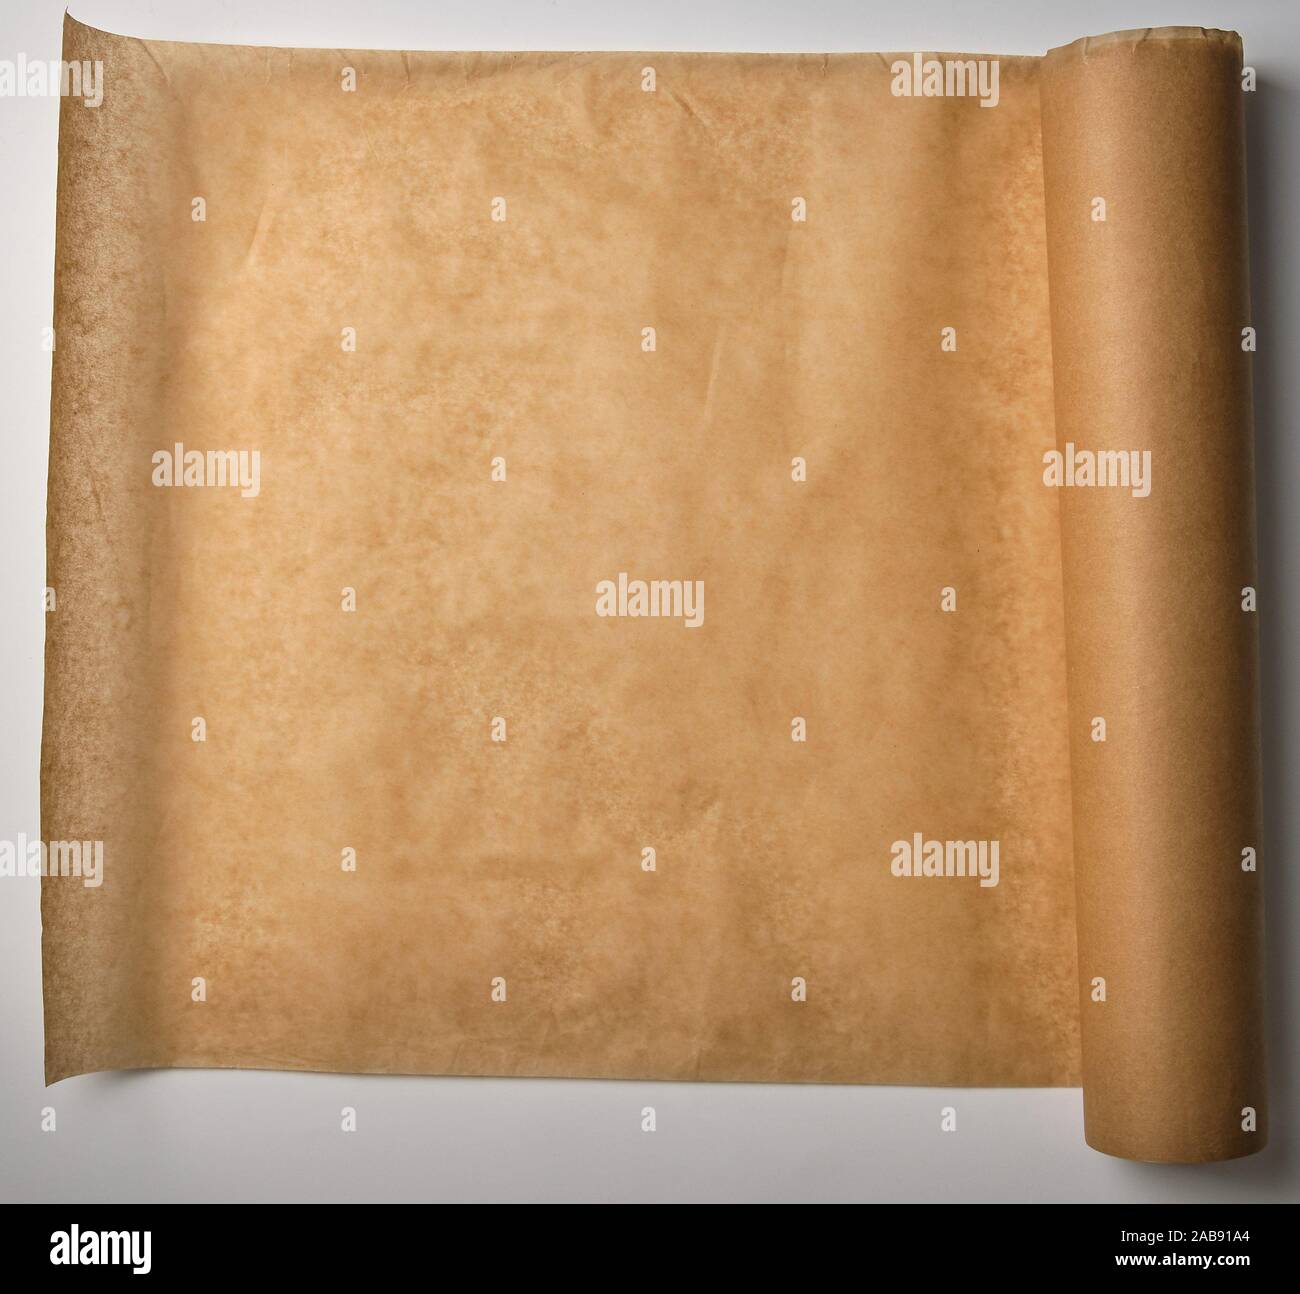 https://c8.alamy.com/comp/2AB91A4/brown-parchment-baking-paper-wound-into-a-large-roll-top-view-2AB91A4.jpg